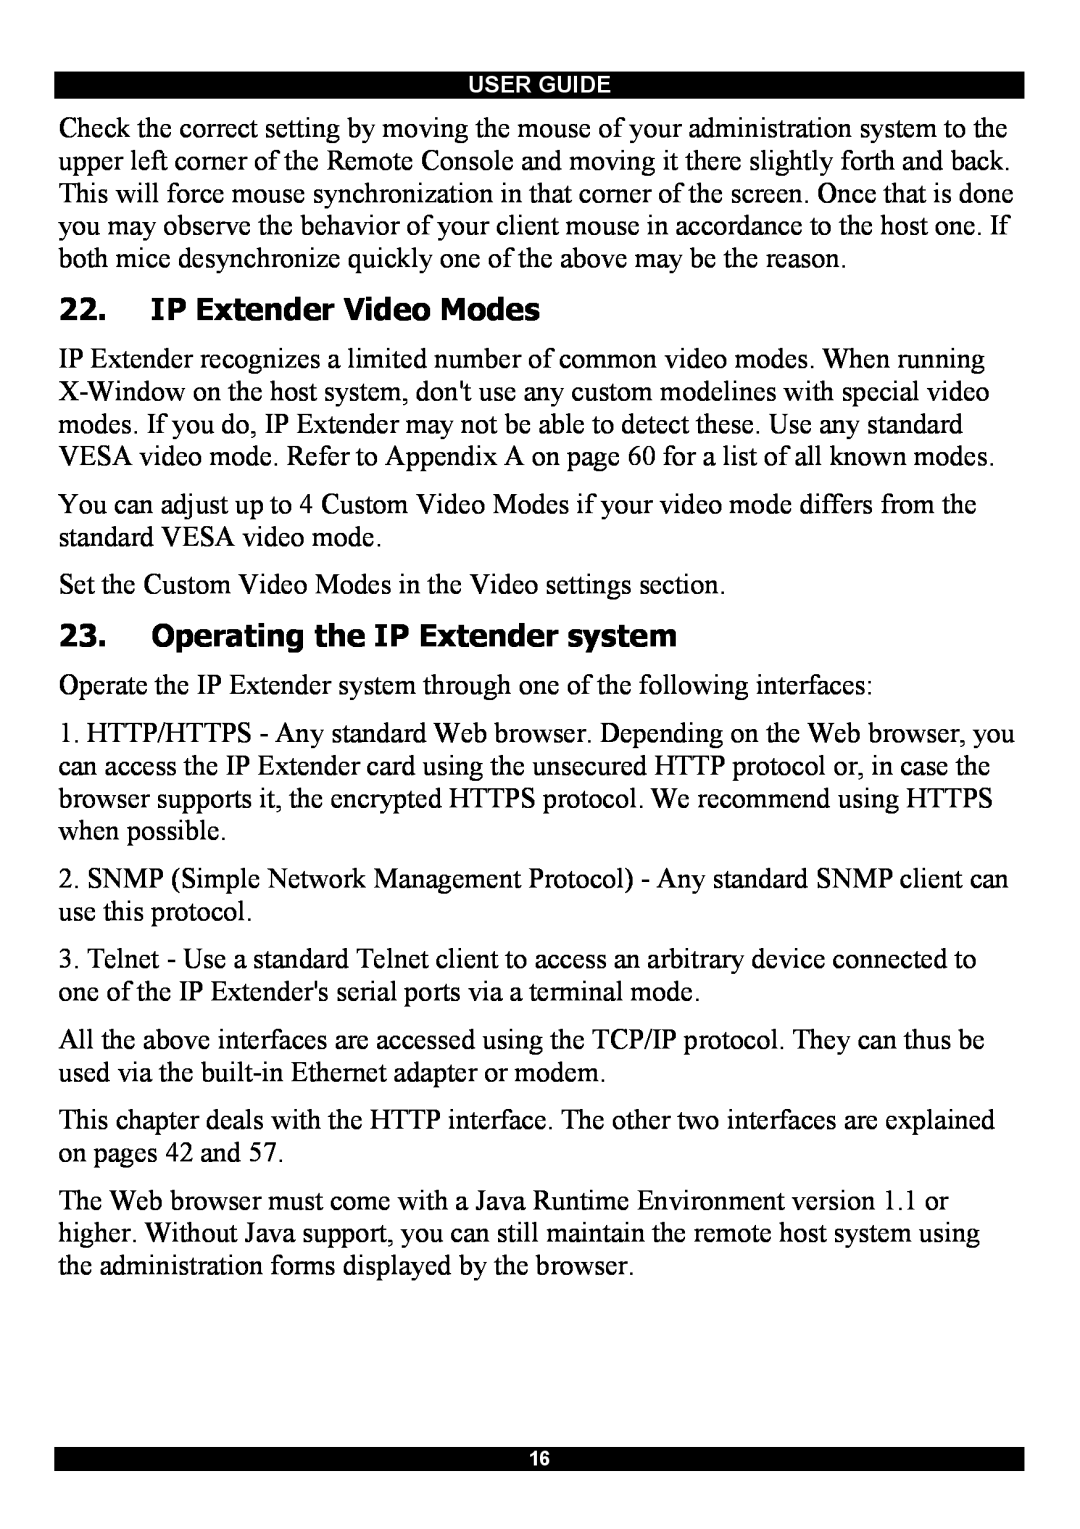 Minicom Advanced Systems Smart IP Extender manual IP Extender Video Modes, Operating the IP Extender system 